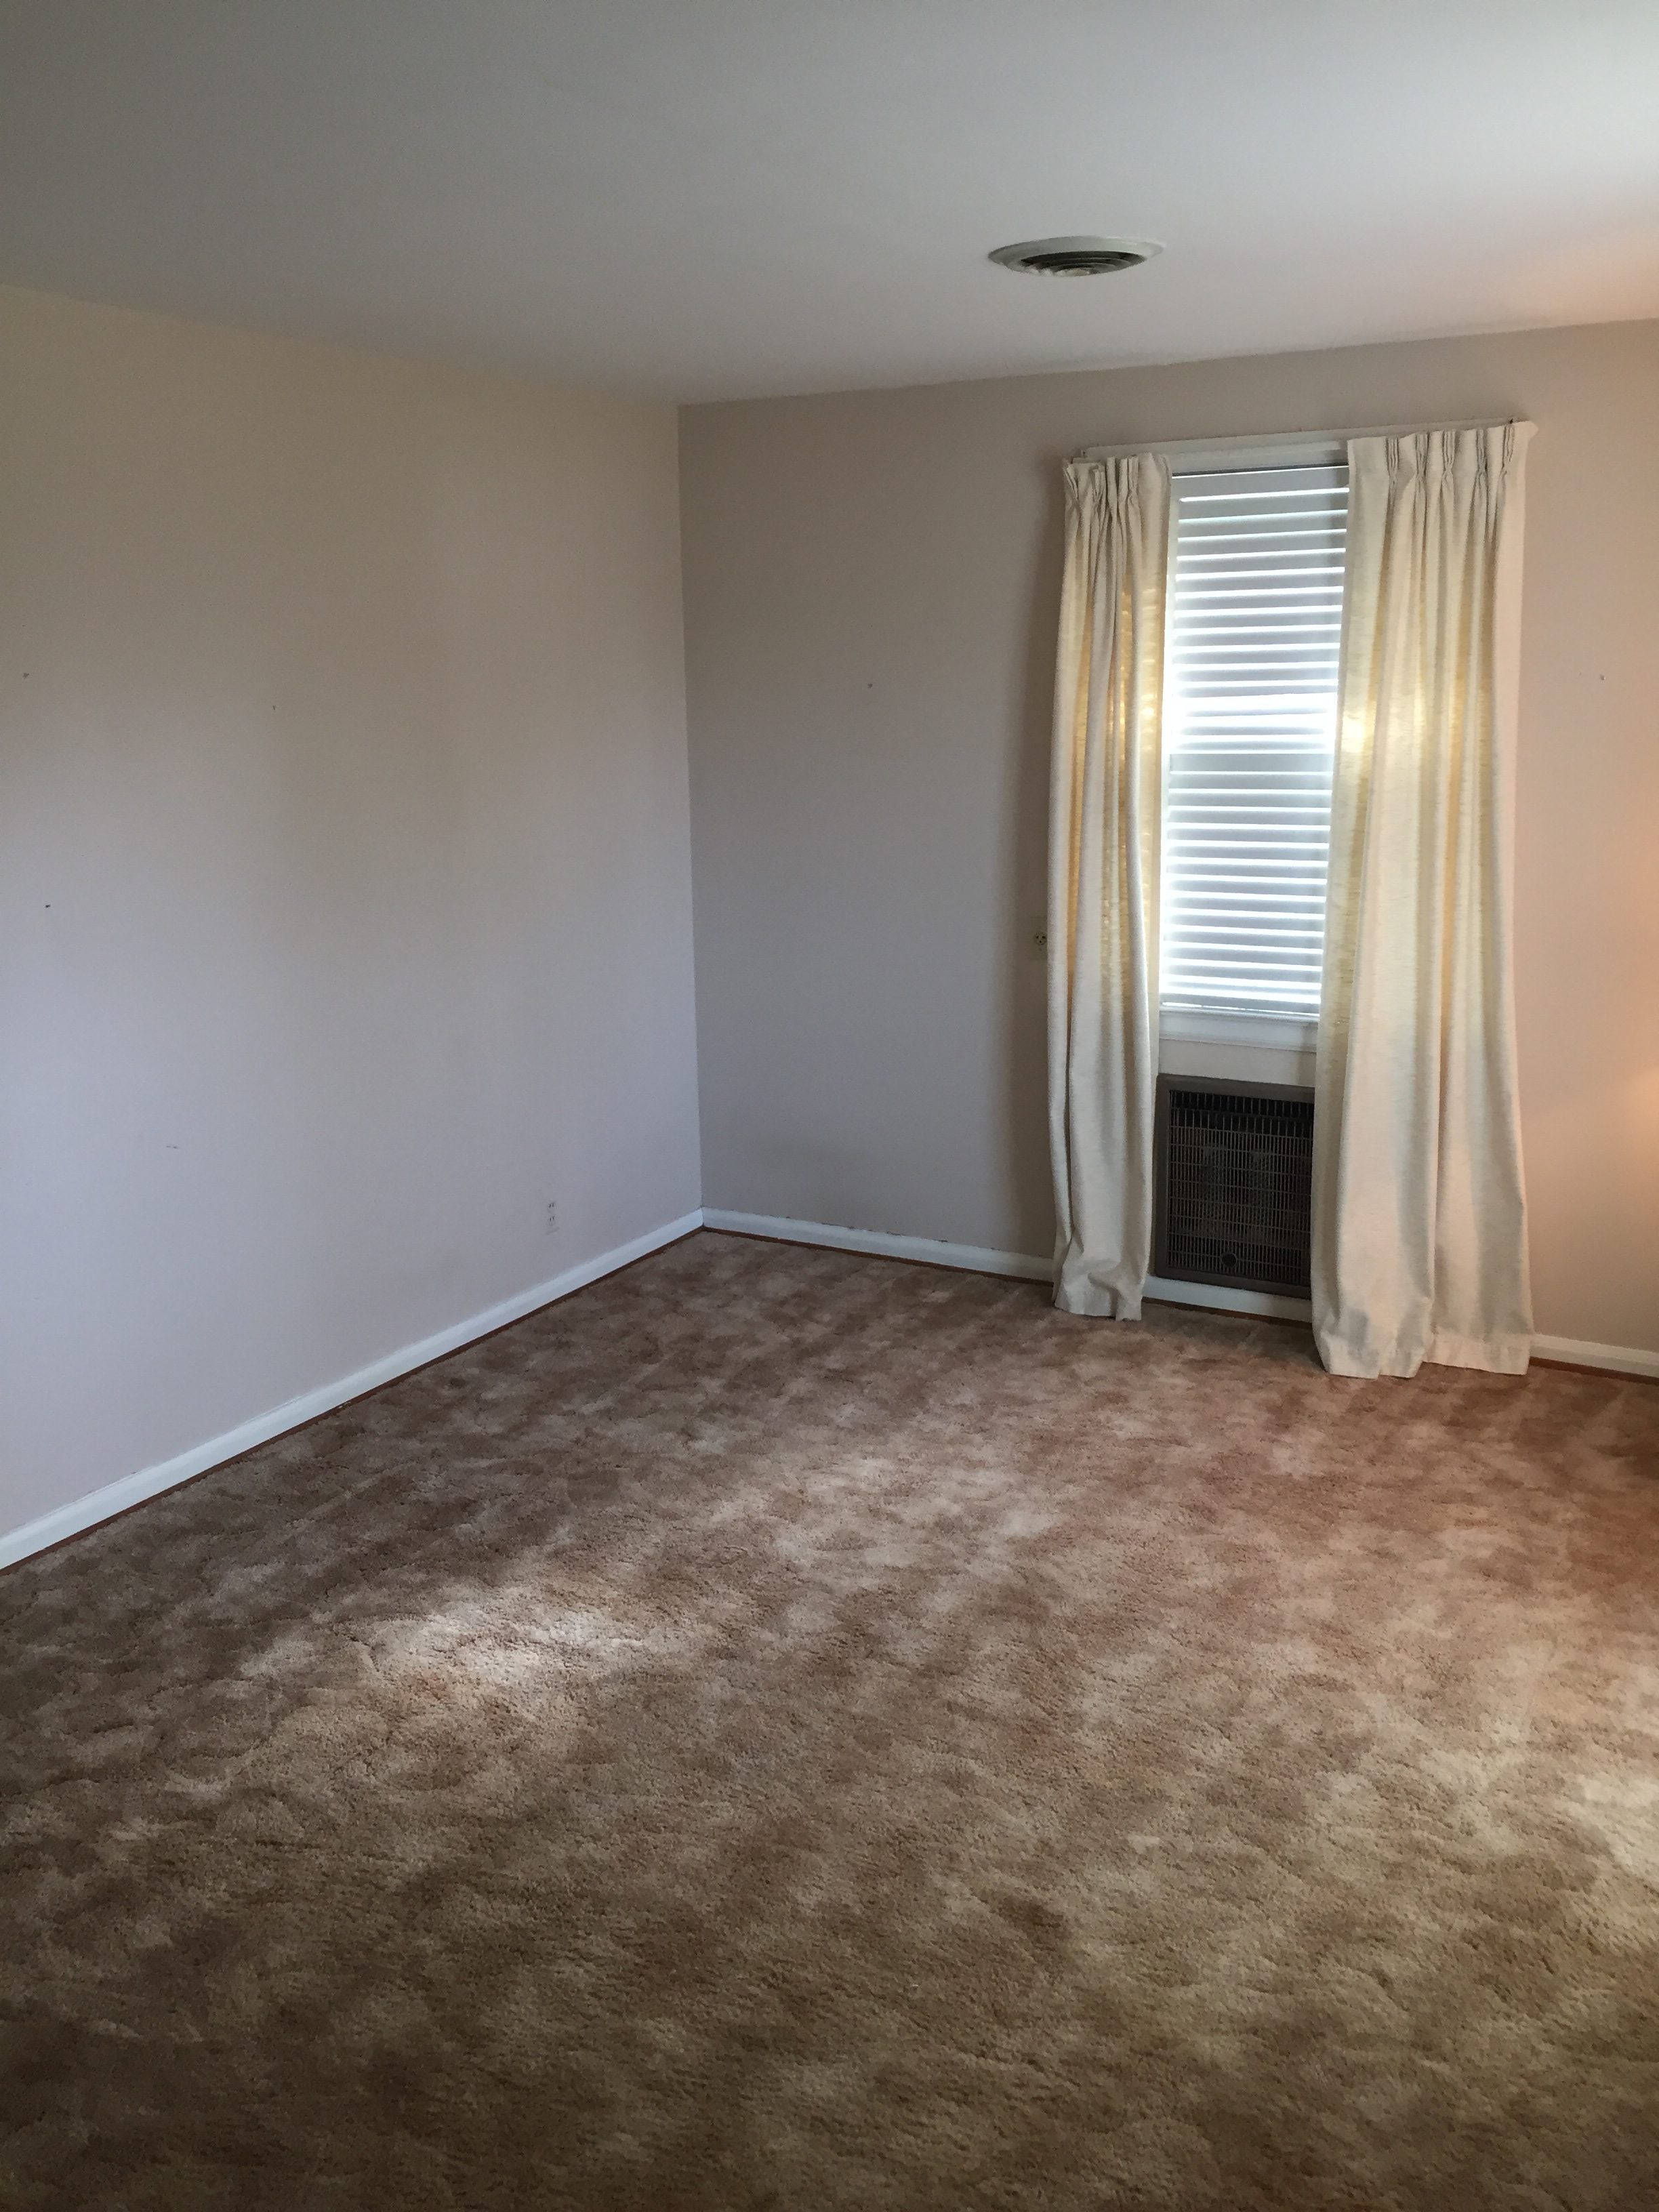 before image of a bland living room with blank walls